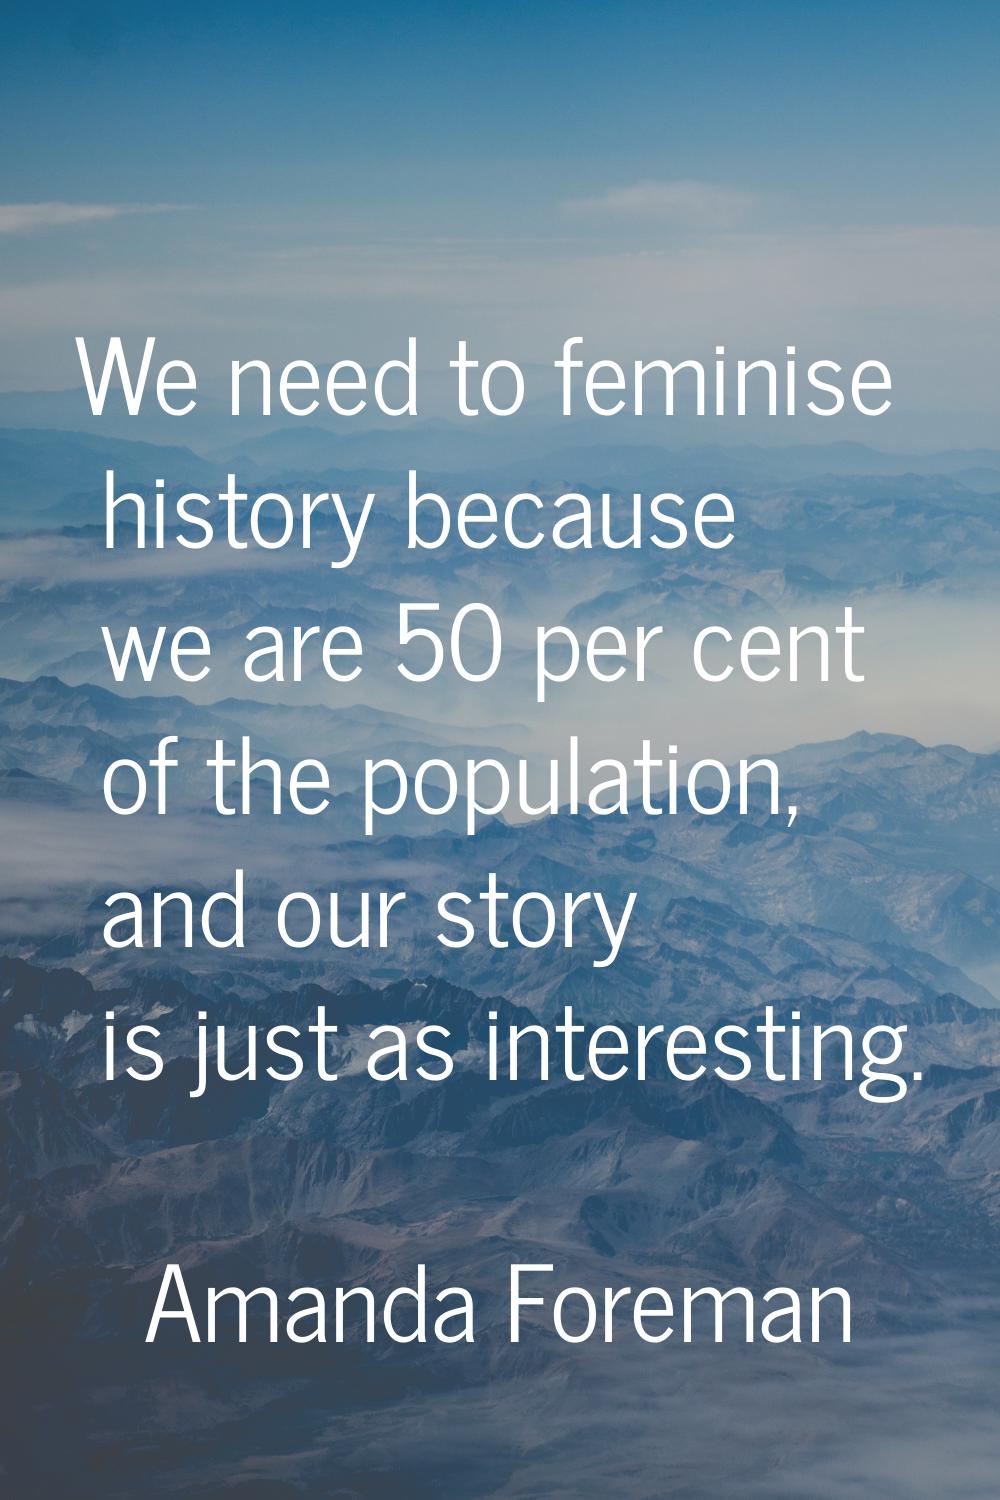 We need to feminise history because we are 50 per cent of the population, and our story is just as 